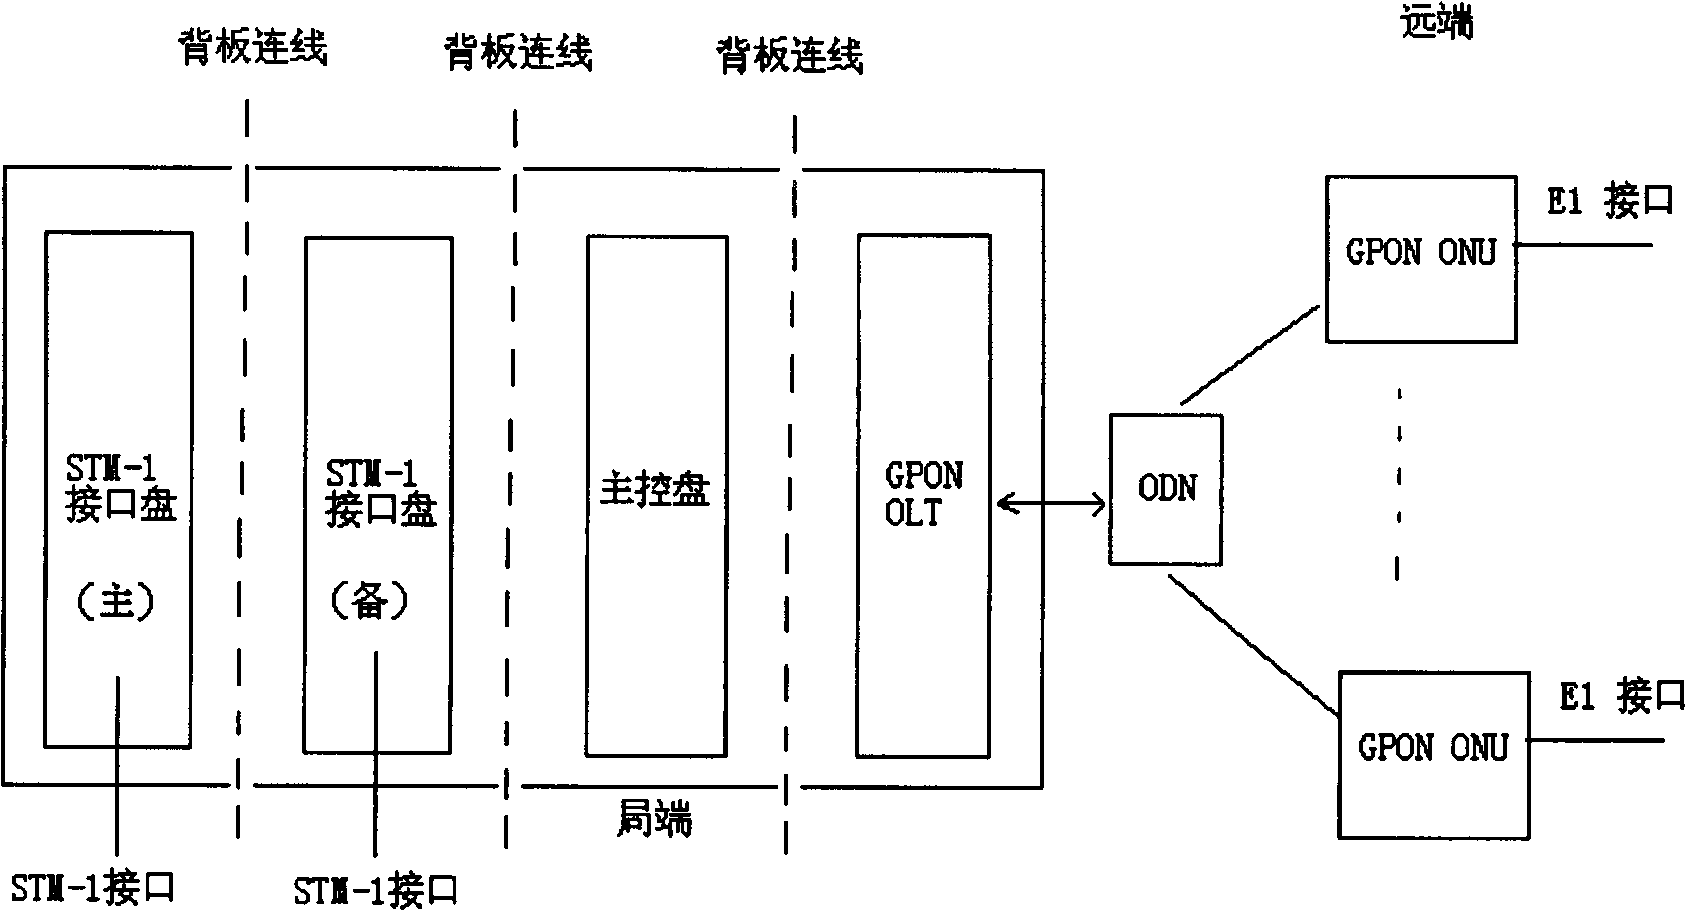 Method for realizing inter-disc STM-1 interface automatic protection switching in gigabit-capable passive optical network (GPON) system